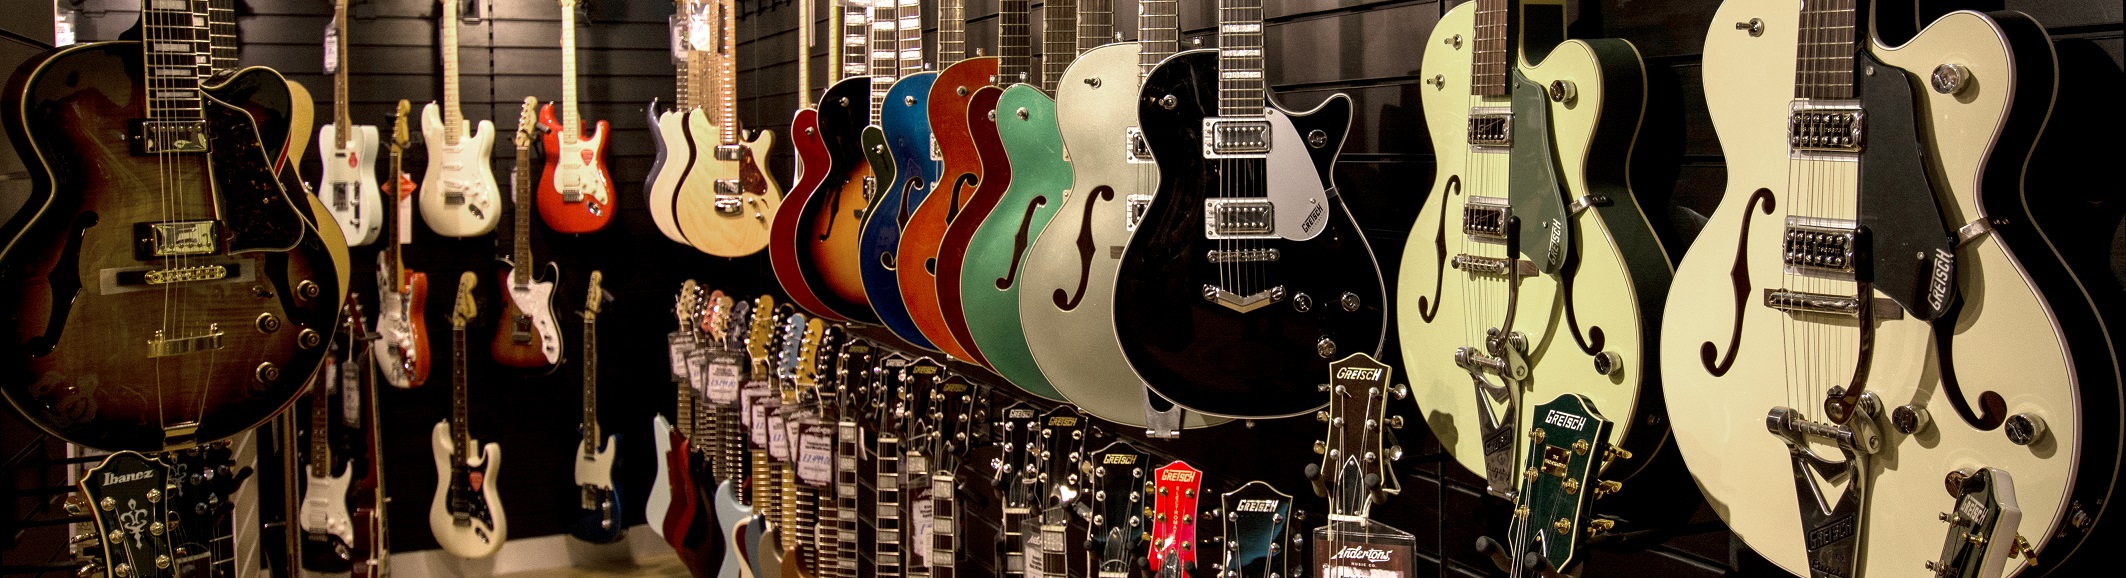 Buying Your First Guitar - Andertons Music Co. (3)